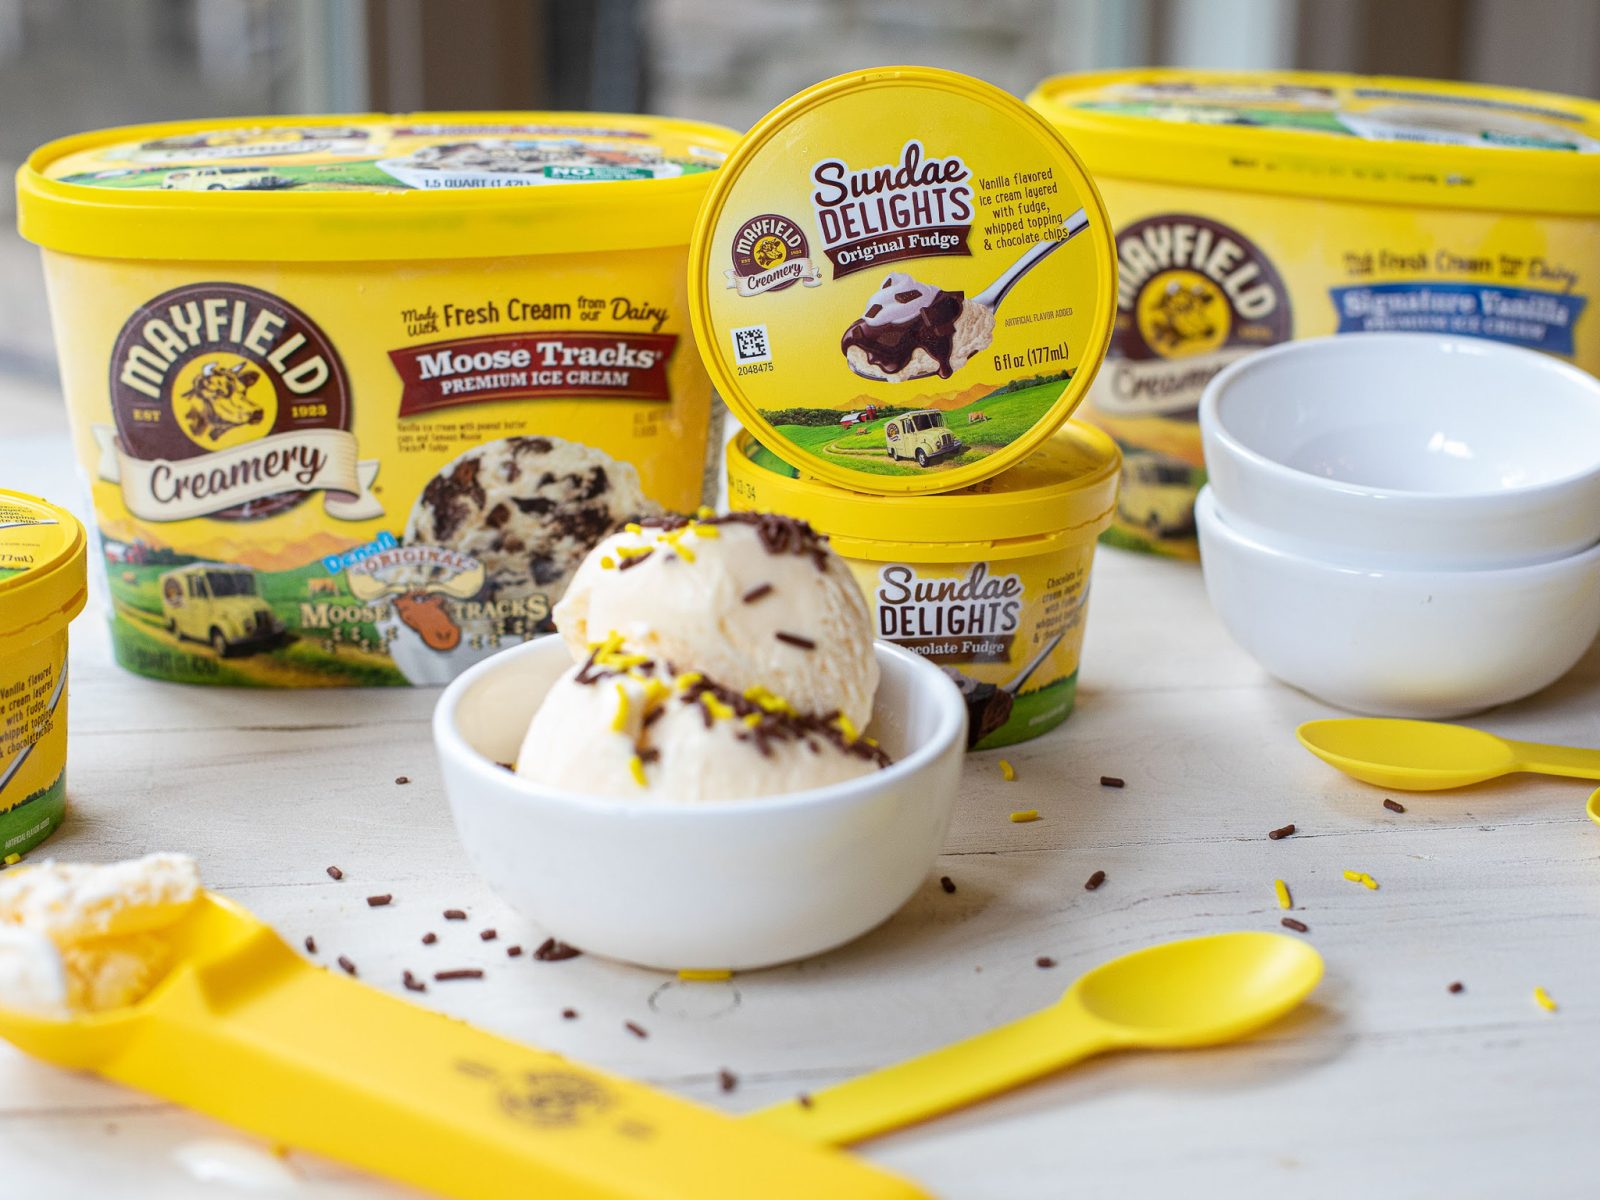 Pick Up Delicious Mayfield Ice Cream At Publix And Grab What's Good - Celebrate National Ice Cream Taste With Amazing Flavor! on I Heart Publix 1